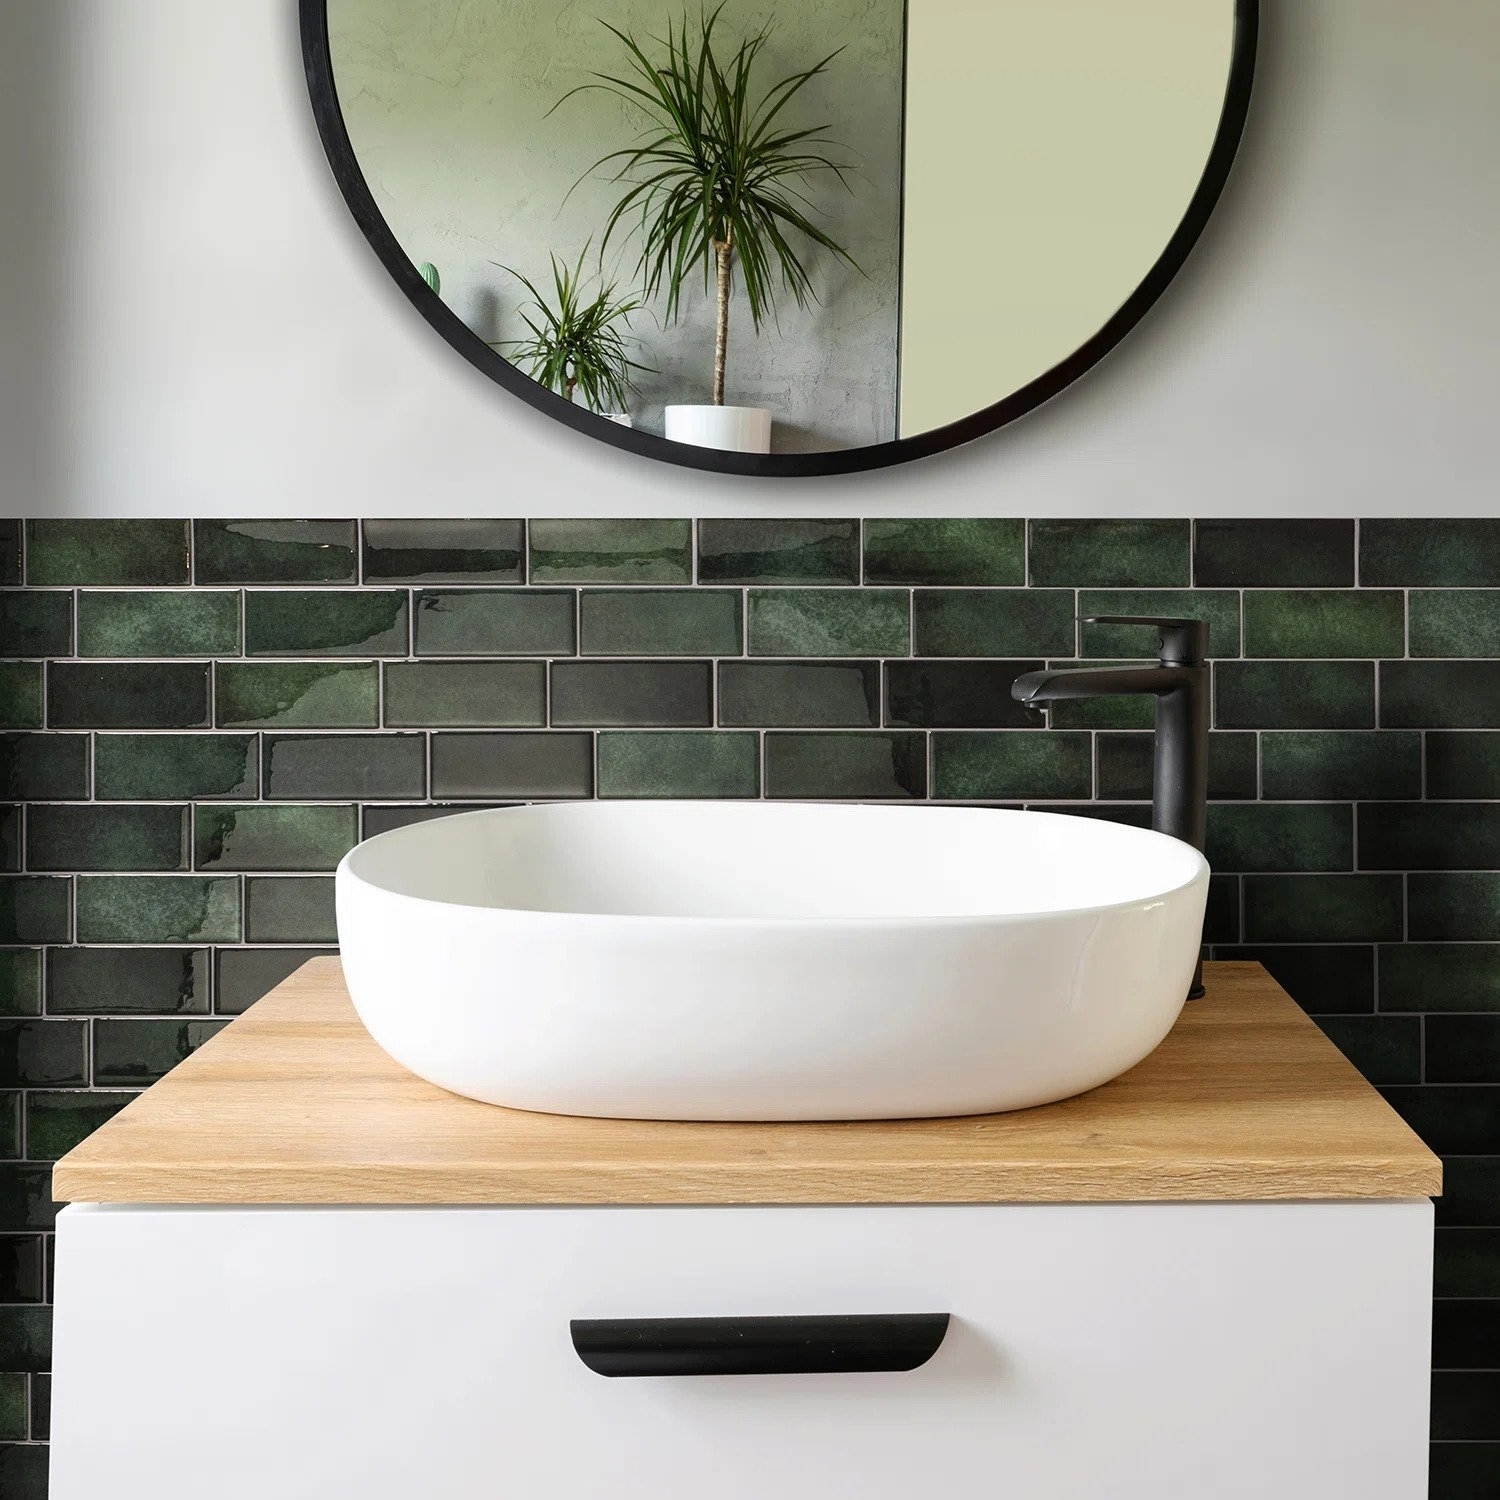 The tiles in green, shown behind a bathroom sink